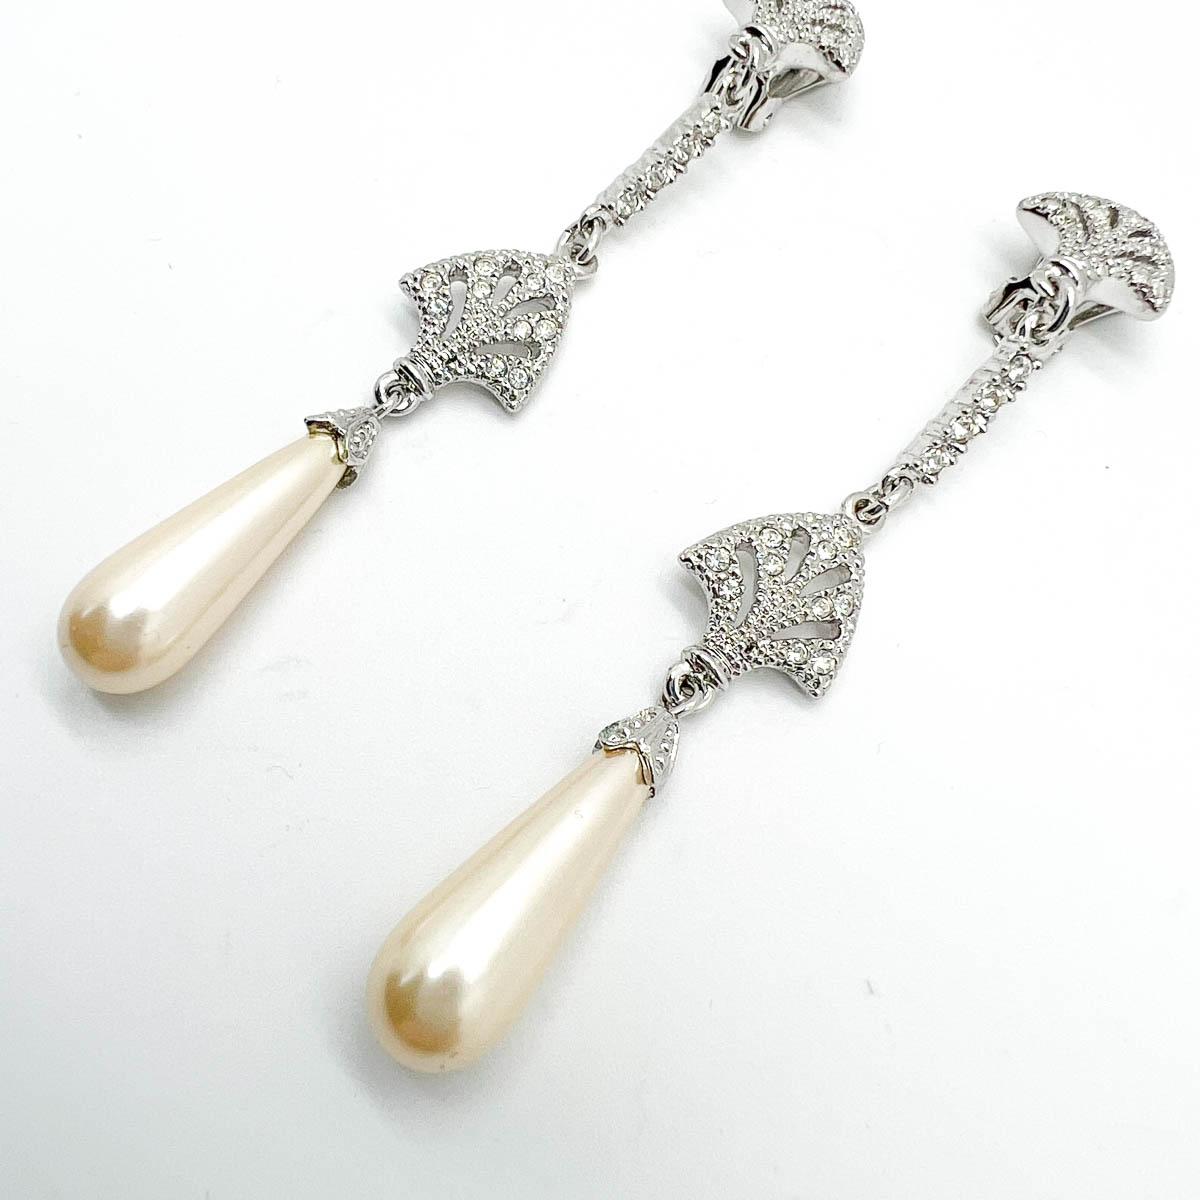 Christian Dior by Galliano Art Deco Style Crystal & Pearl Earrings 2000s In Good Condition For Sale In Wilmslow, GB